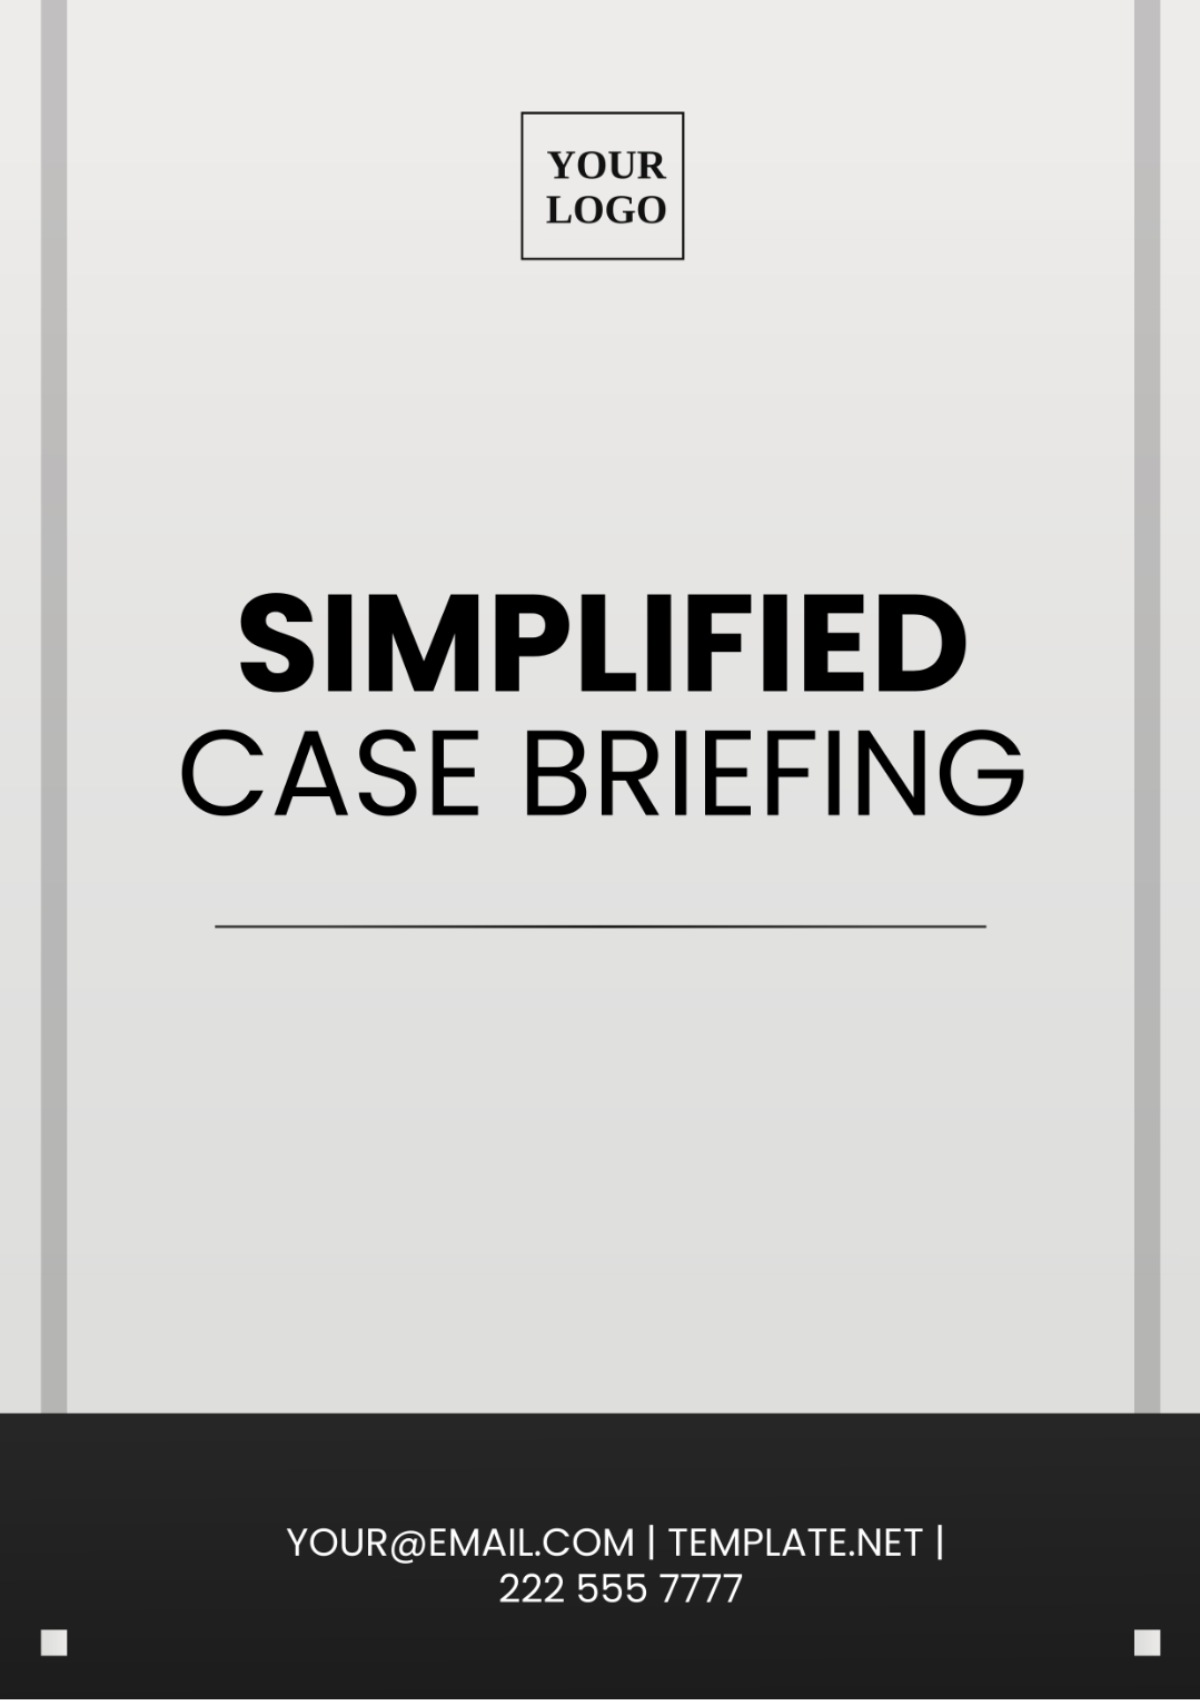 Free Simplified Case Briefing Template